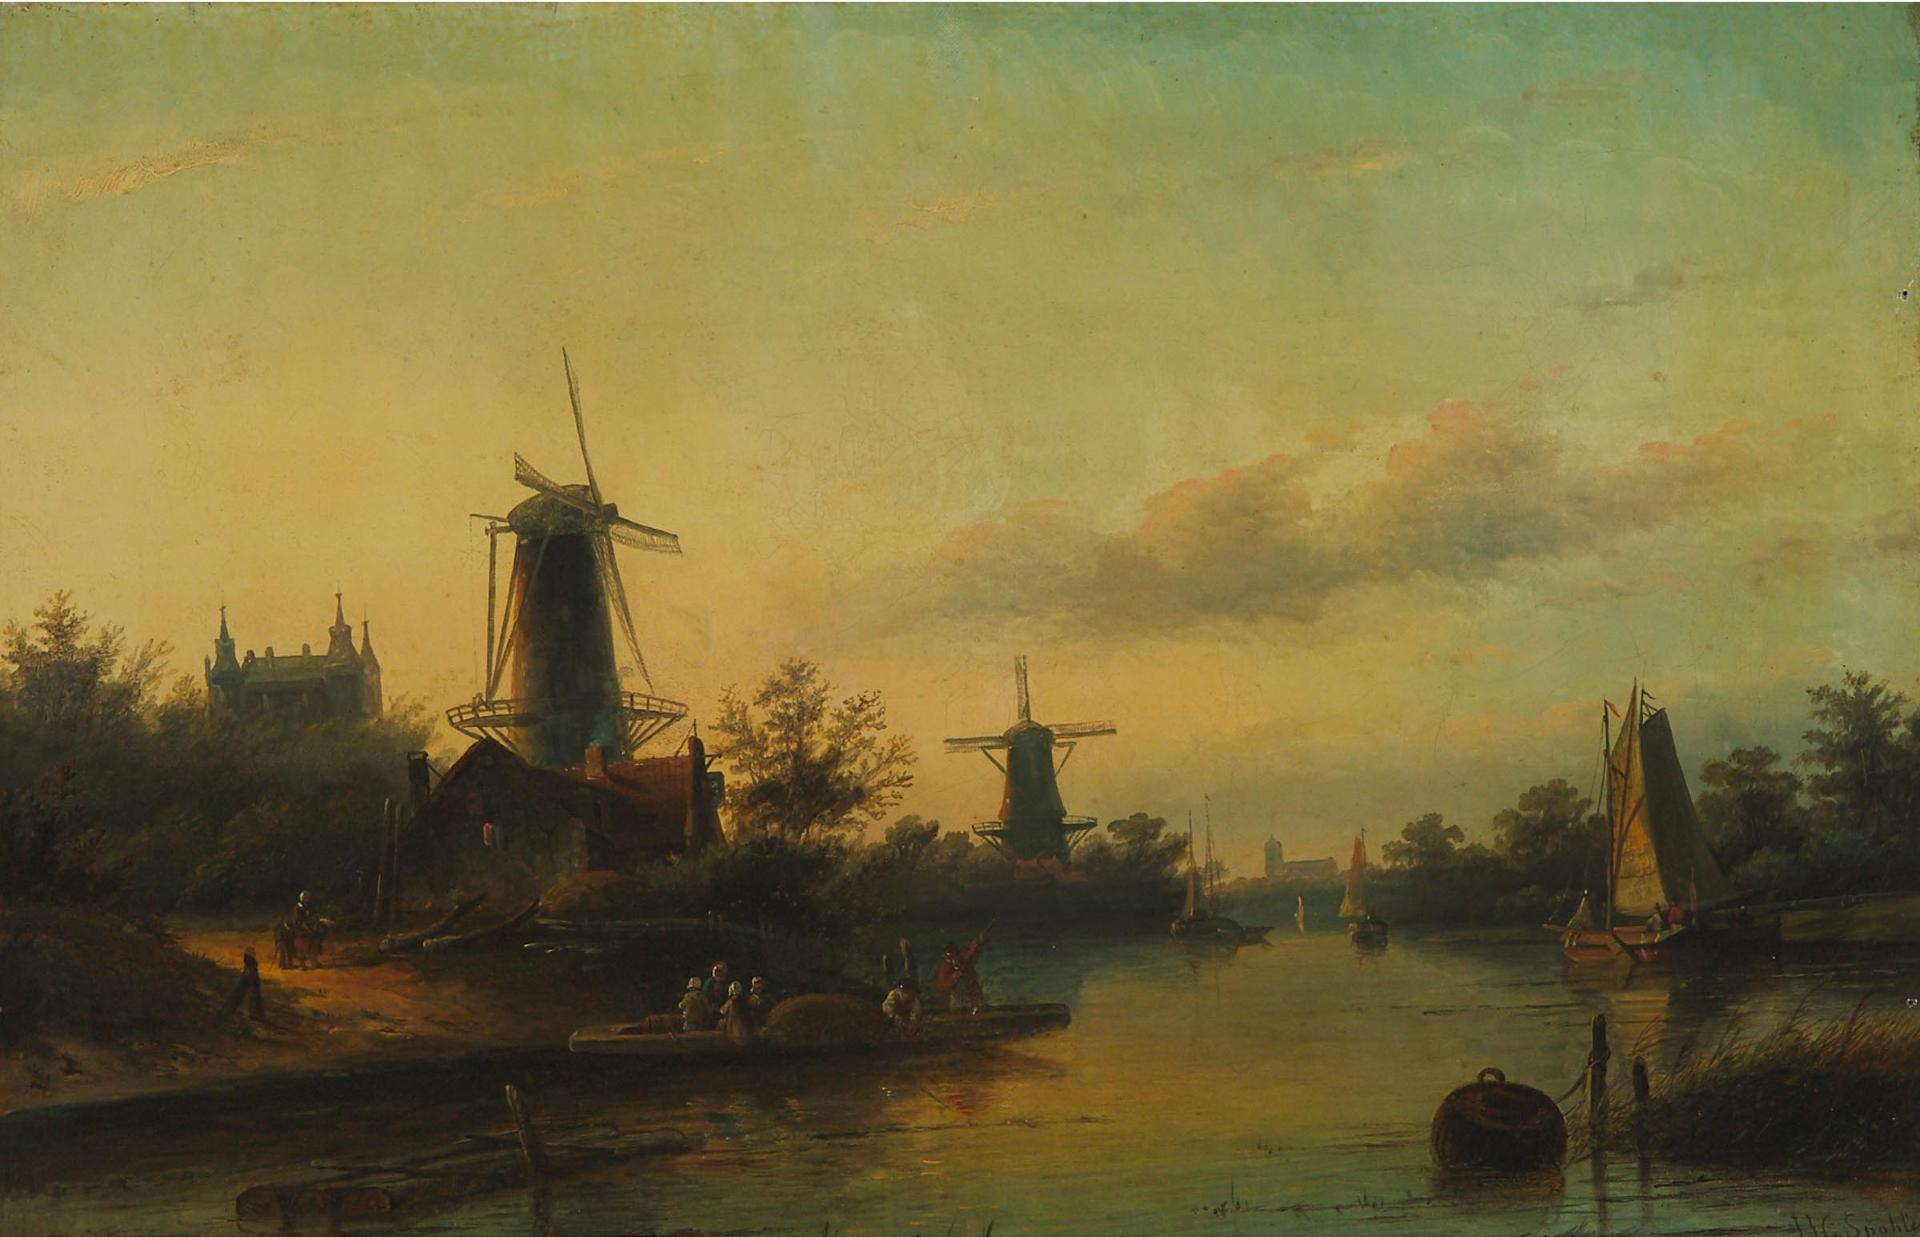 Jacob Jan Coenraad Spohler (1837-1923) - Villagers In Boats On A Dutch Waterway With Windmills On Shore With The Sint-Michaëlskerk Of Oudewater In Distance